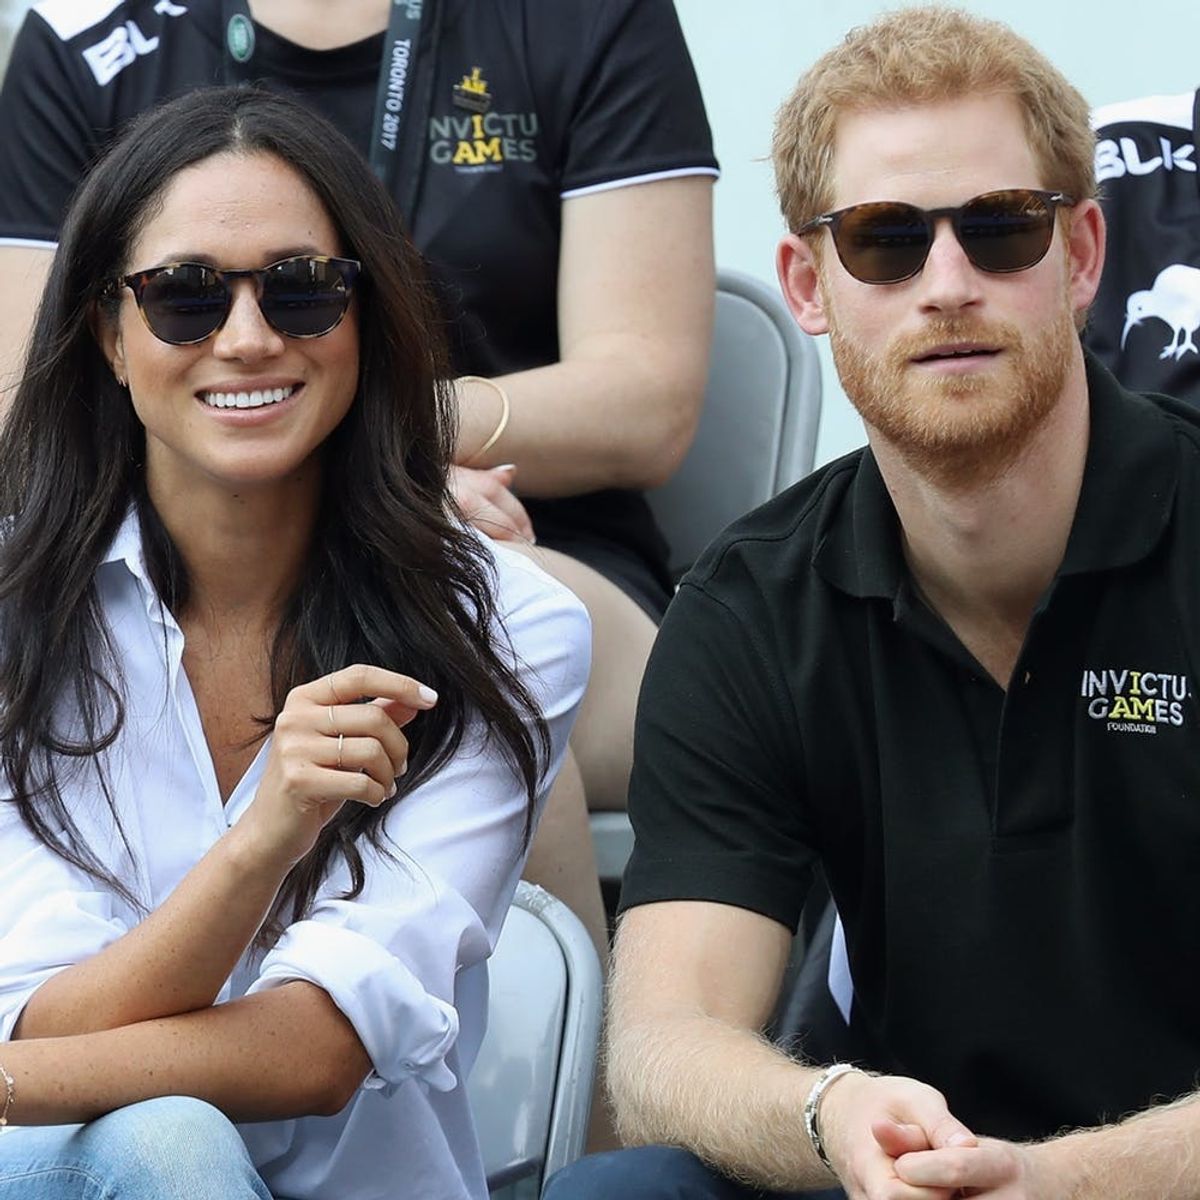 Prince Harry Is Engaged to Meghan Markle!